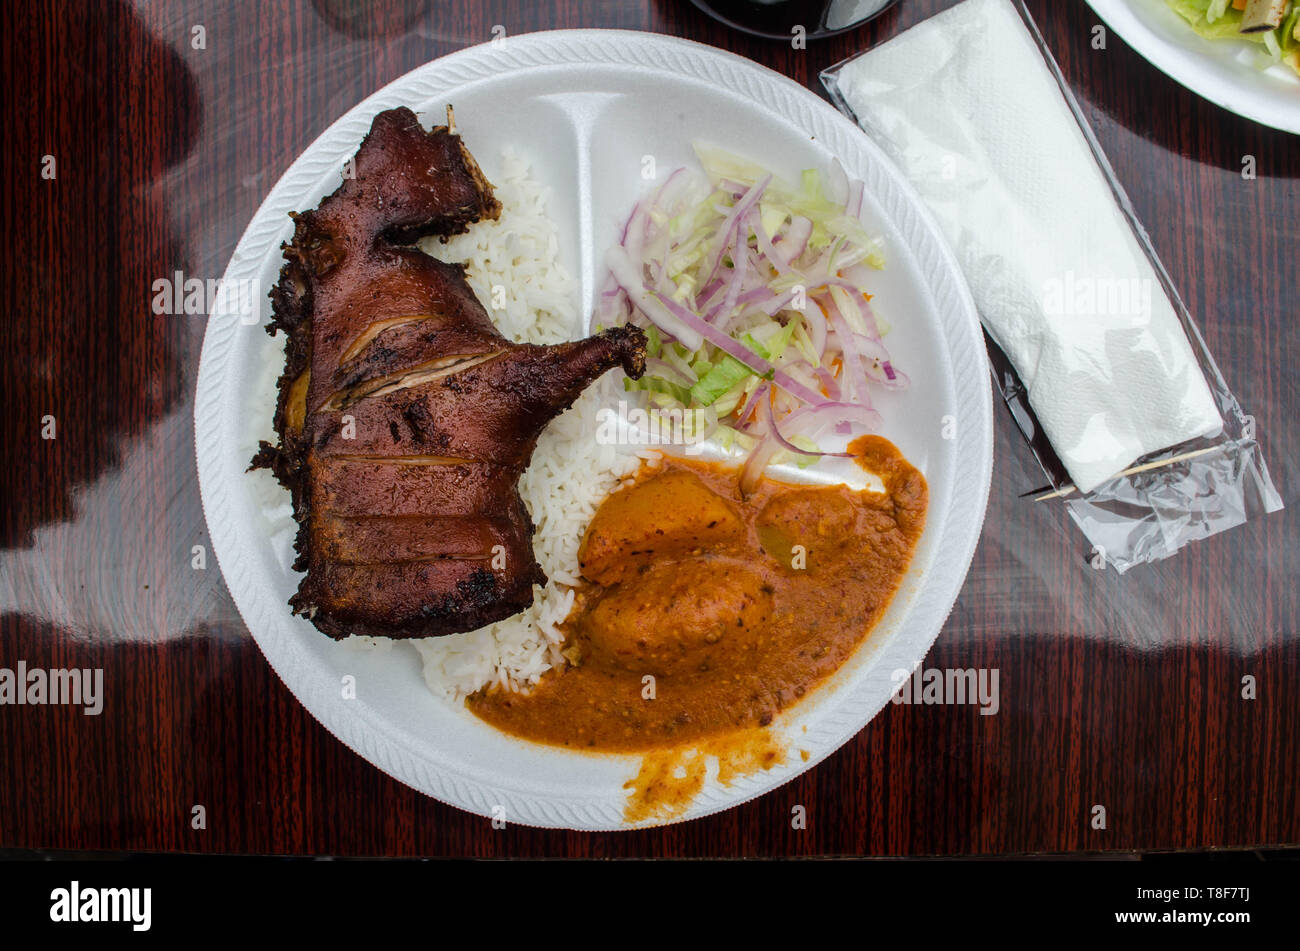 Dish with roasted guinea pig as is served in Peru restaurants Stock Photo